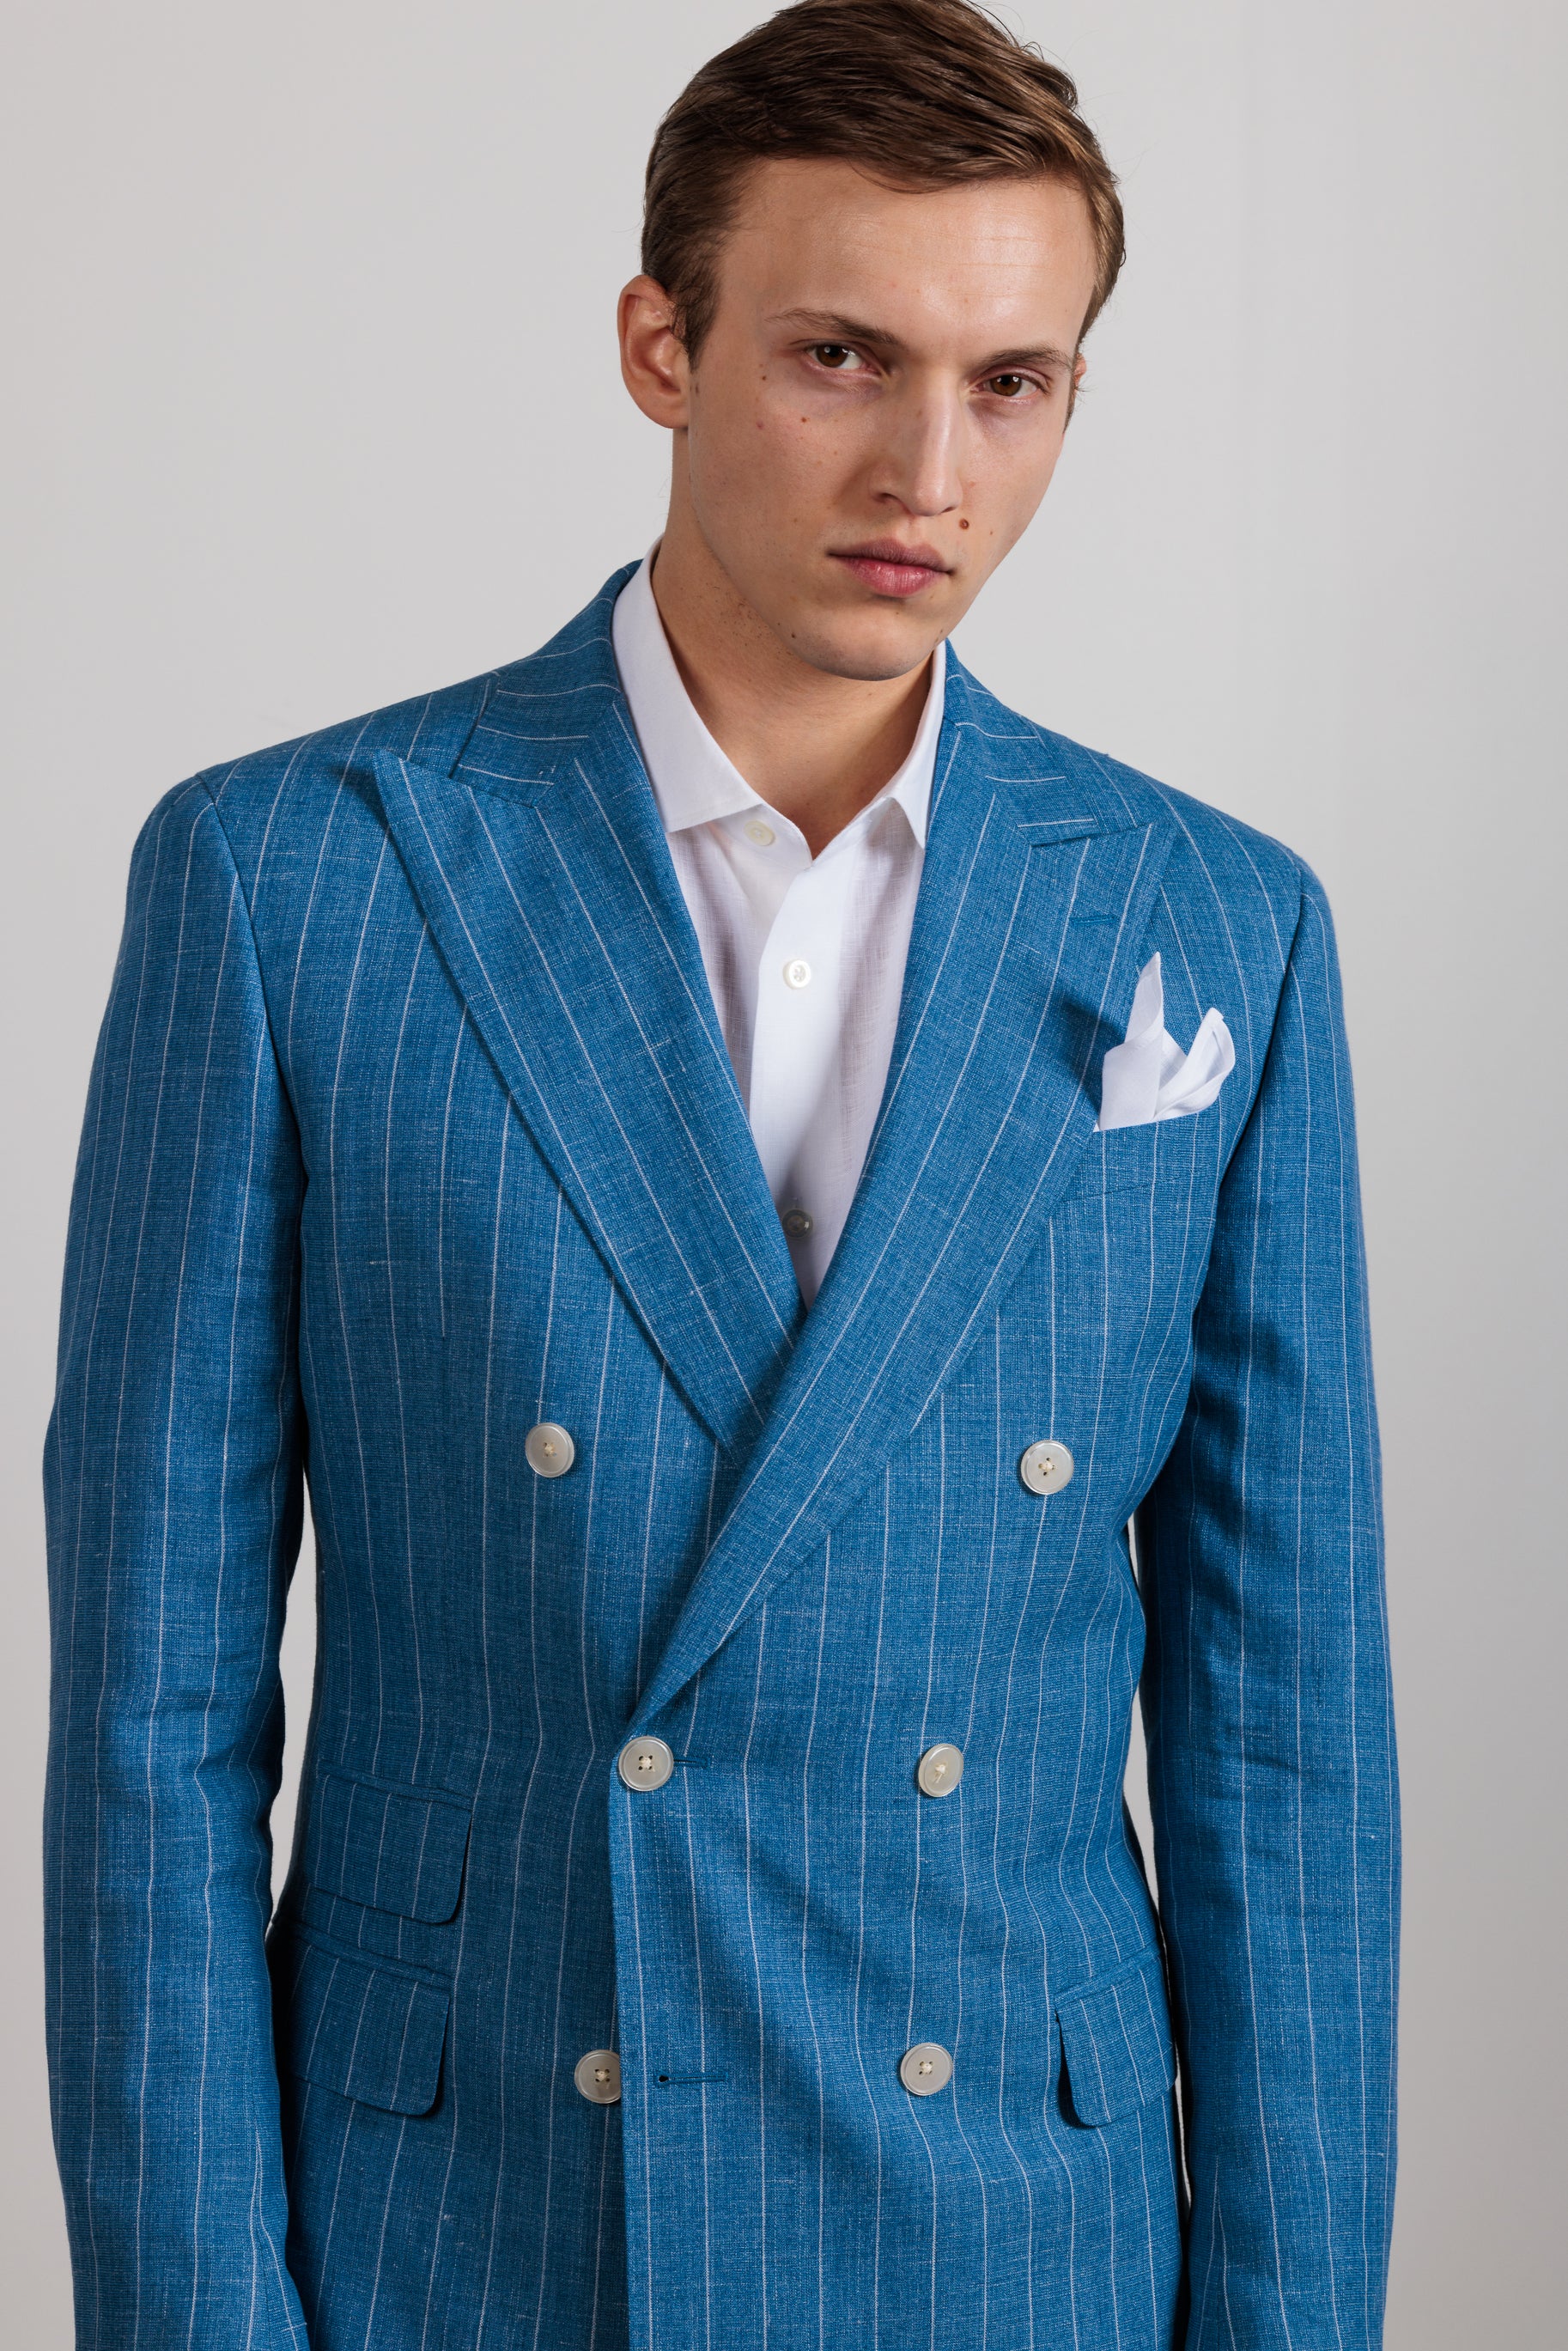 Double Breasted Suit "CITY" / Superfine Wool, Linen & Silk by Loro Piana